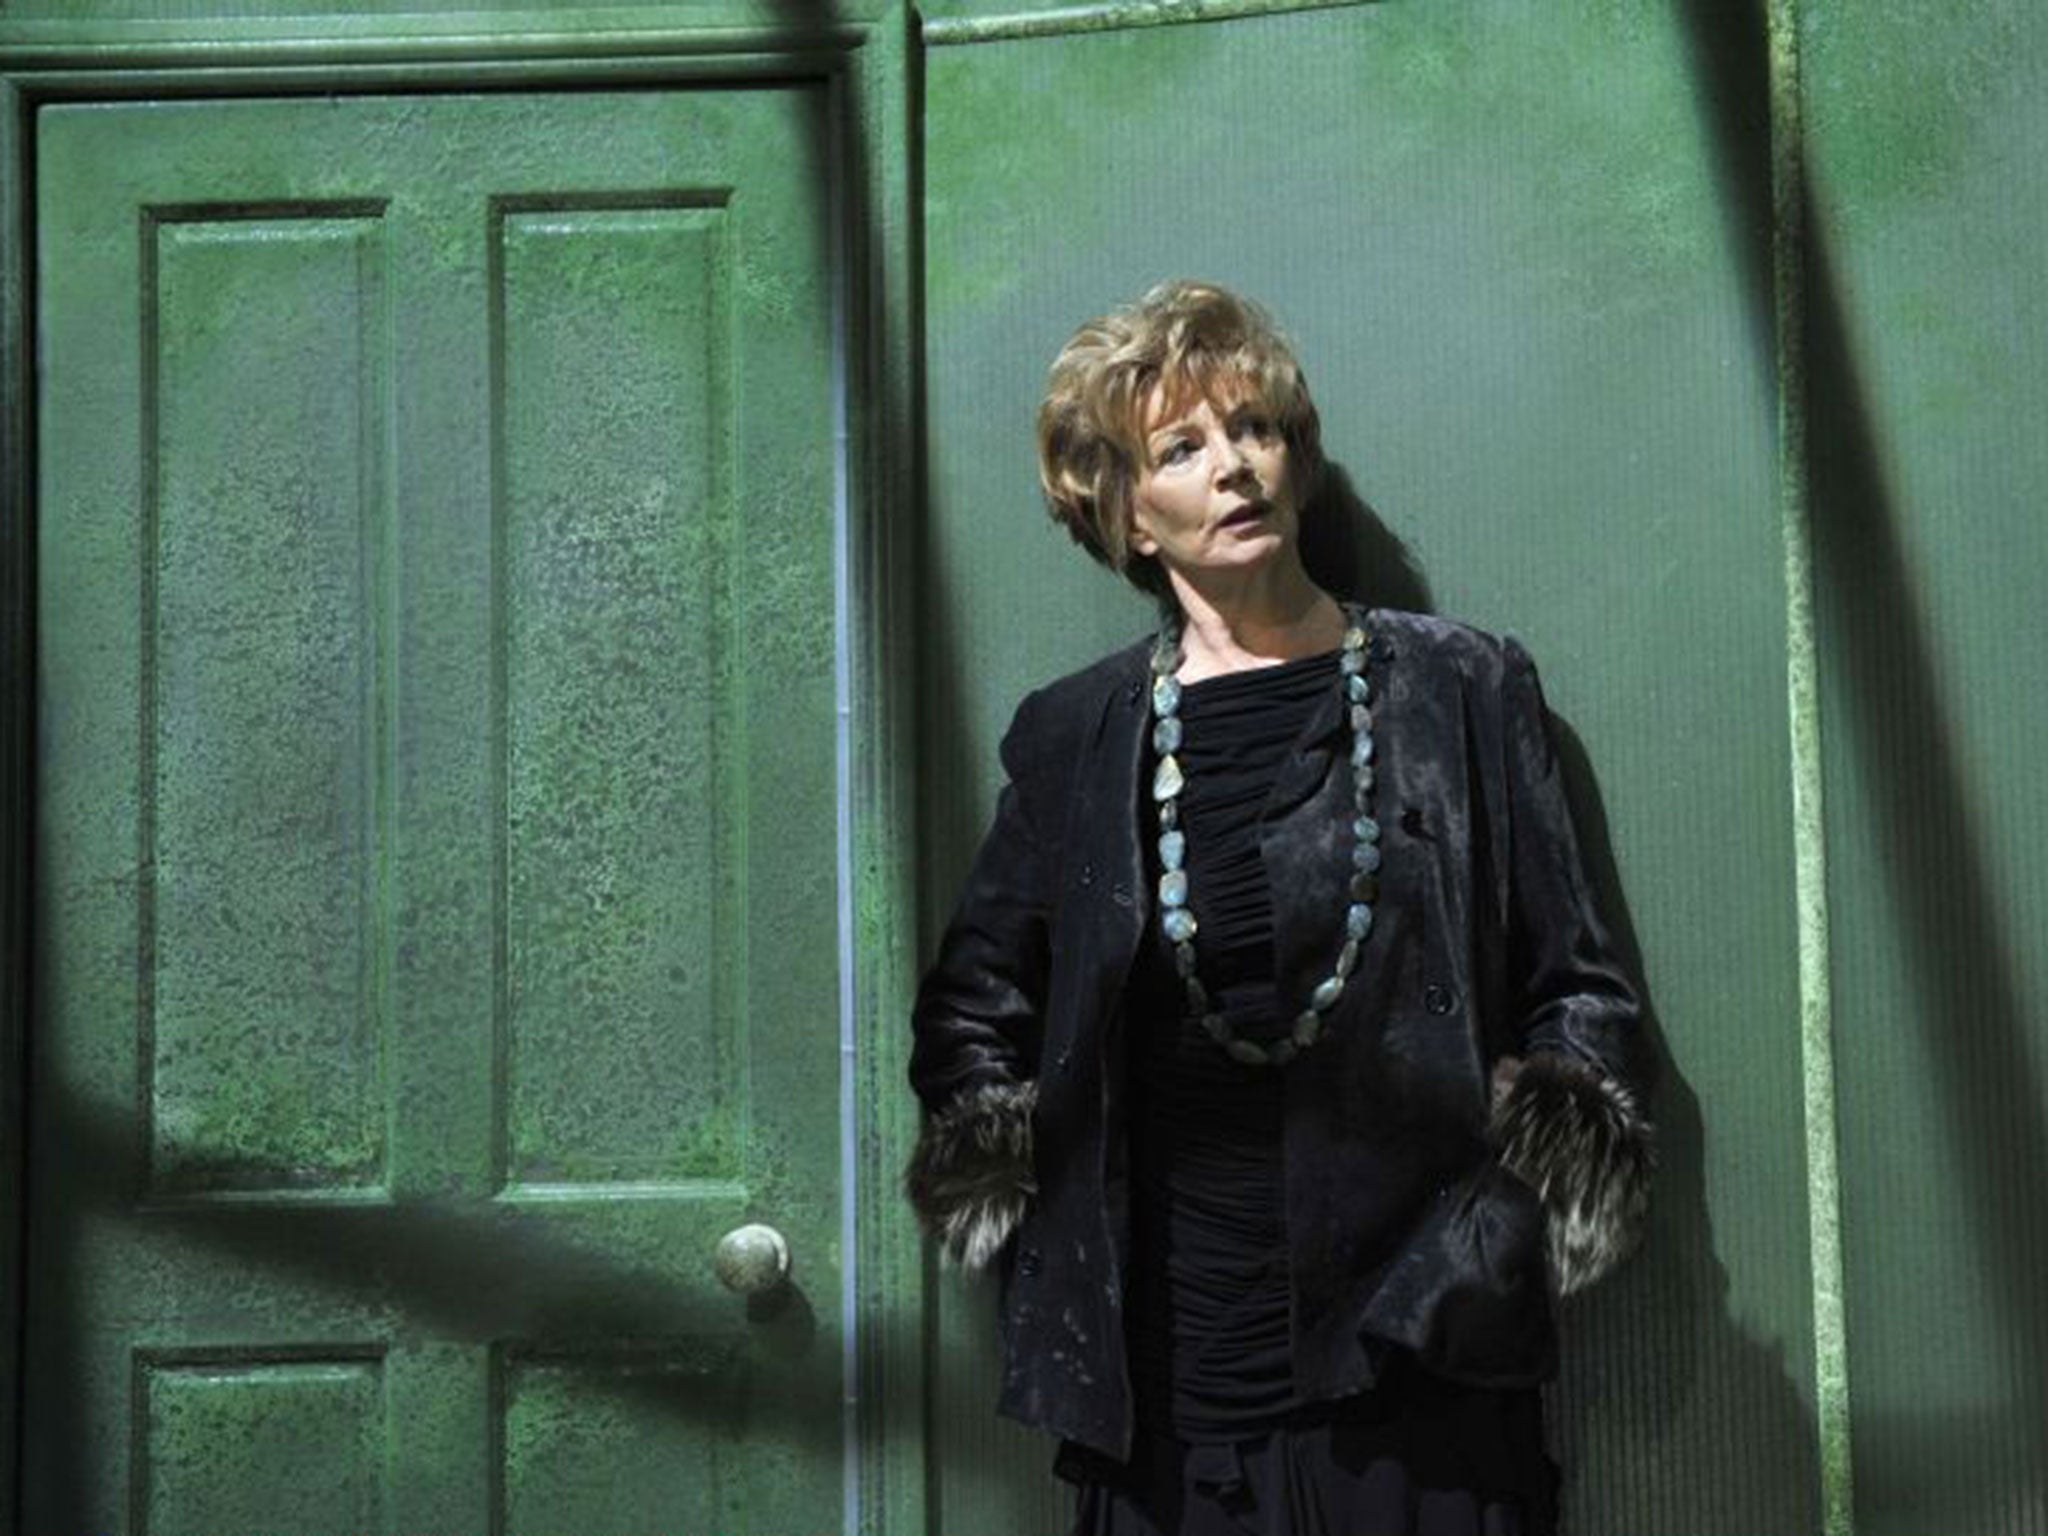 At 83, Edna O’Brien’s stock has never been higher